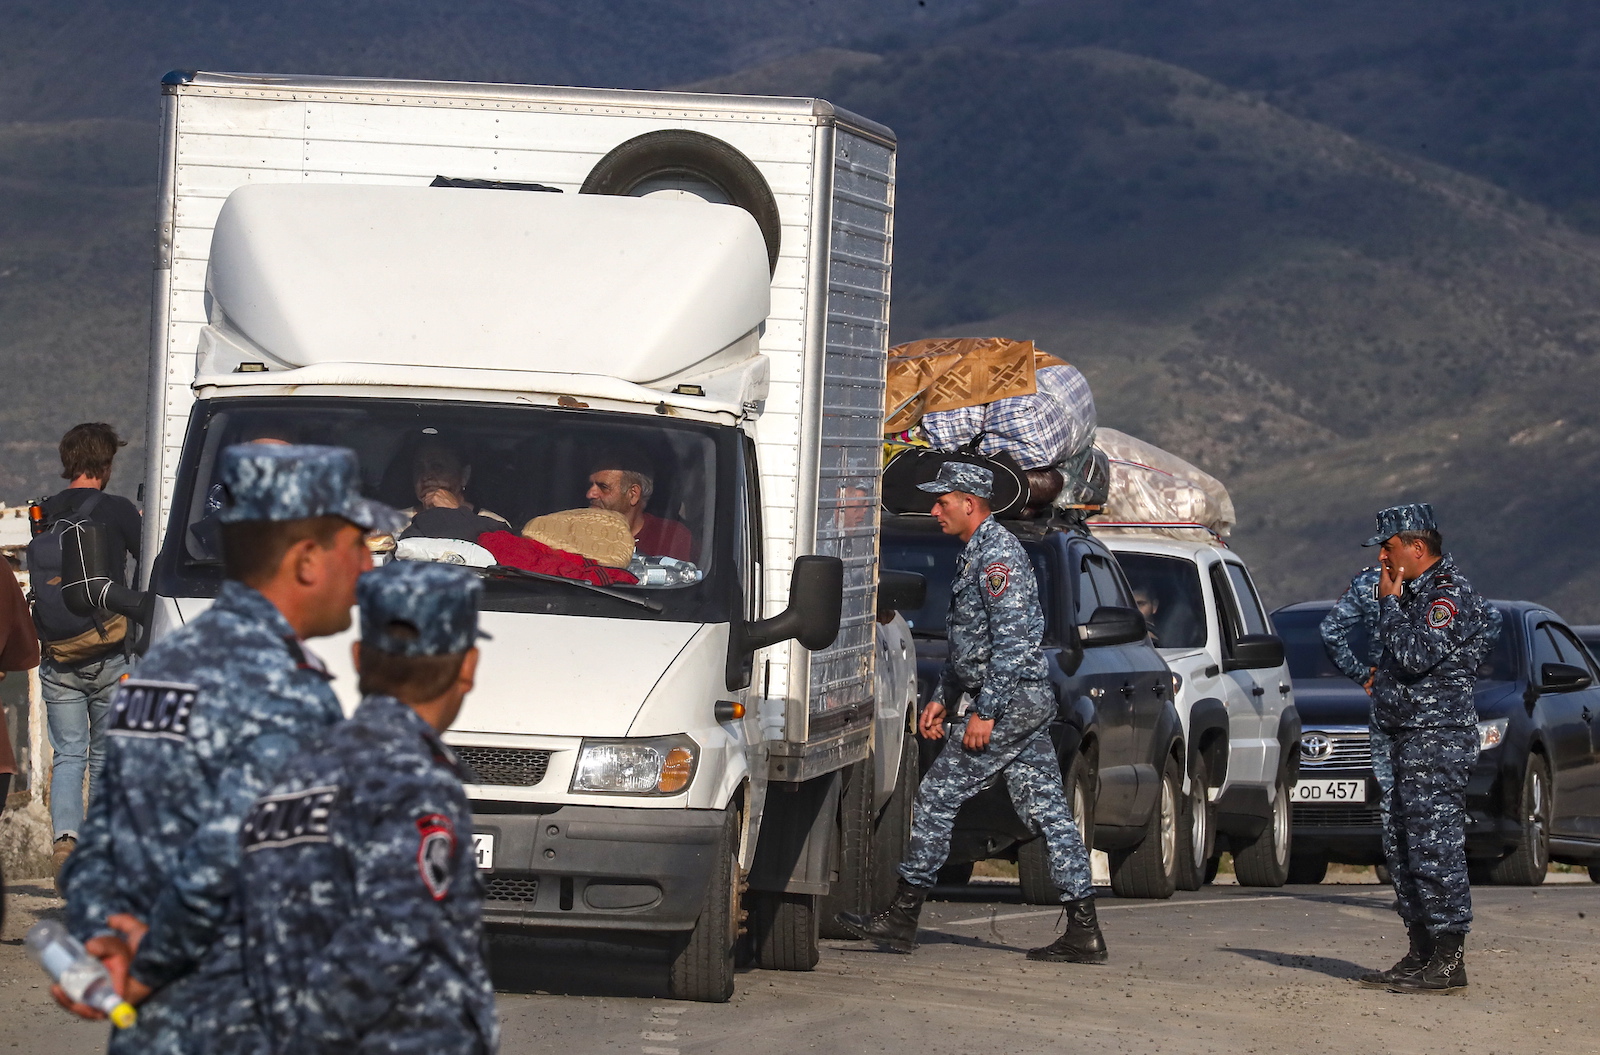 epa10887801 Armenian police organise passing of ethnic Armenians fleeing Nagorno-Karabakh region after they crossed the Azerbaijan-Armenia border near the village of Kornidzor, Armenia, 28 September 2023. Azerbaijan on 19 September 2023 launched a brief military offensive on the contested region of Nagorno-Karabakh, a breakaway enclave that is home to some 120,000 ethnic Armenians. The Armenian government announced the evacuation of more than 68,000 local residents from Nagorno-Karabakh, following a ceasefire agreed on 20 September with Azerbaijan. Nagorno-Karabakh will cease to exist as a self-proclaimed state from 01 January 2024, the regionâ€™s separatist leader, Samvel Shakhramanyan, announced on 28 September, after signing a decree to dissolve all its institutions.  EPA/ANATOLY MALTSEV